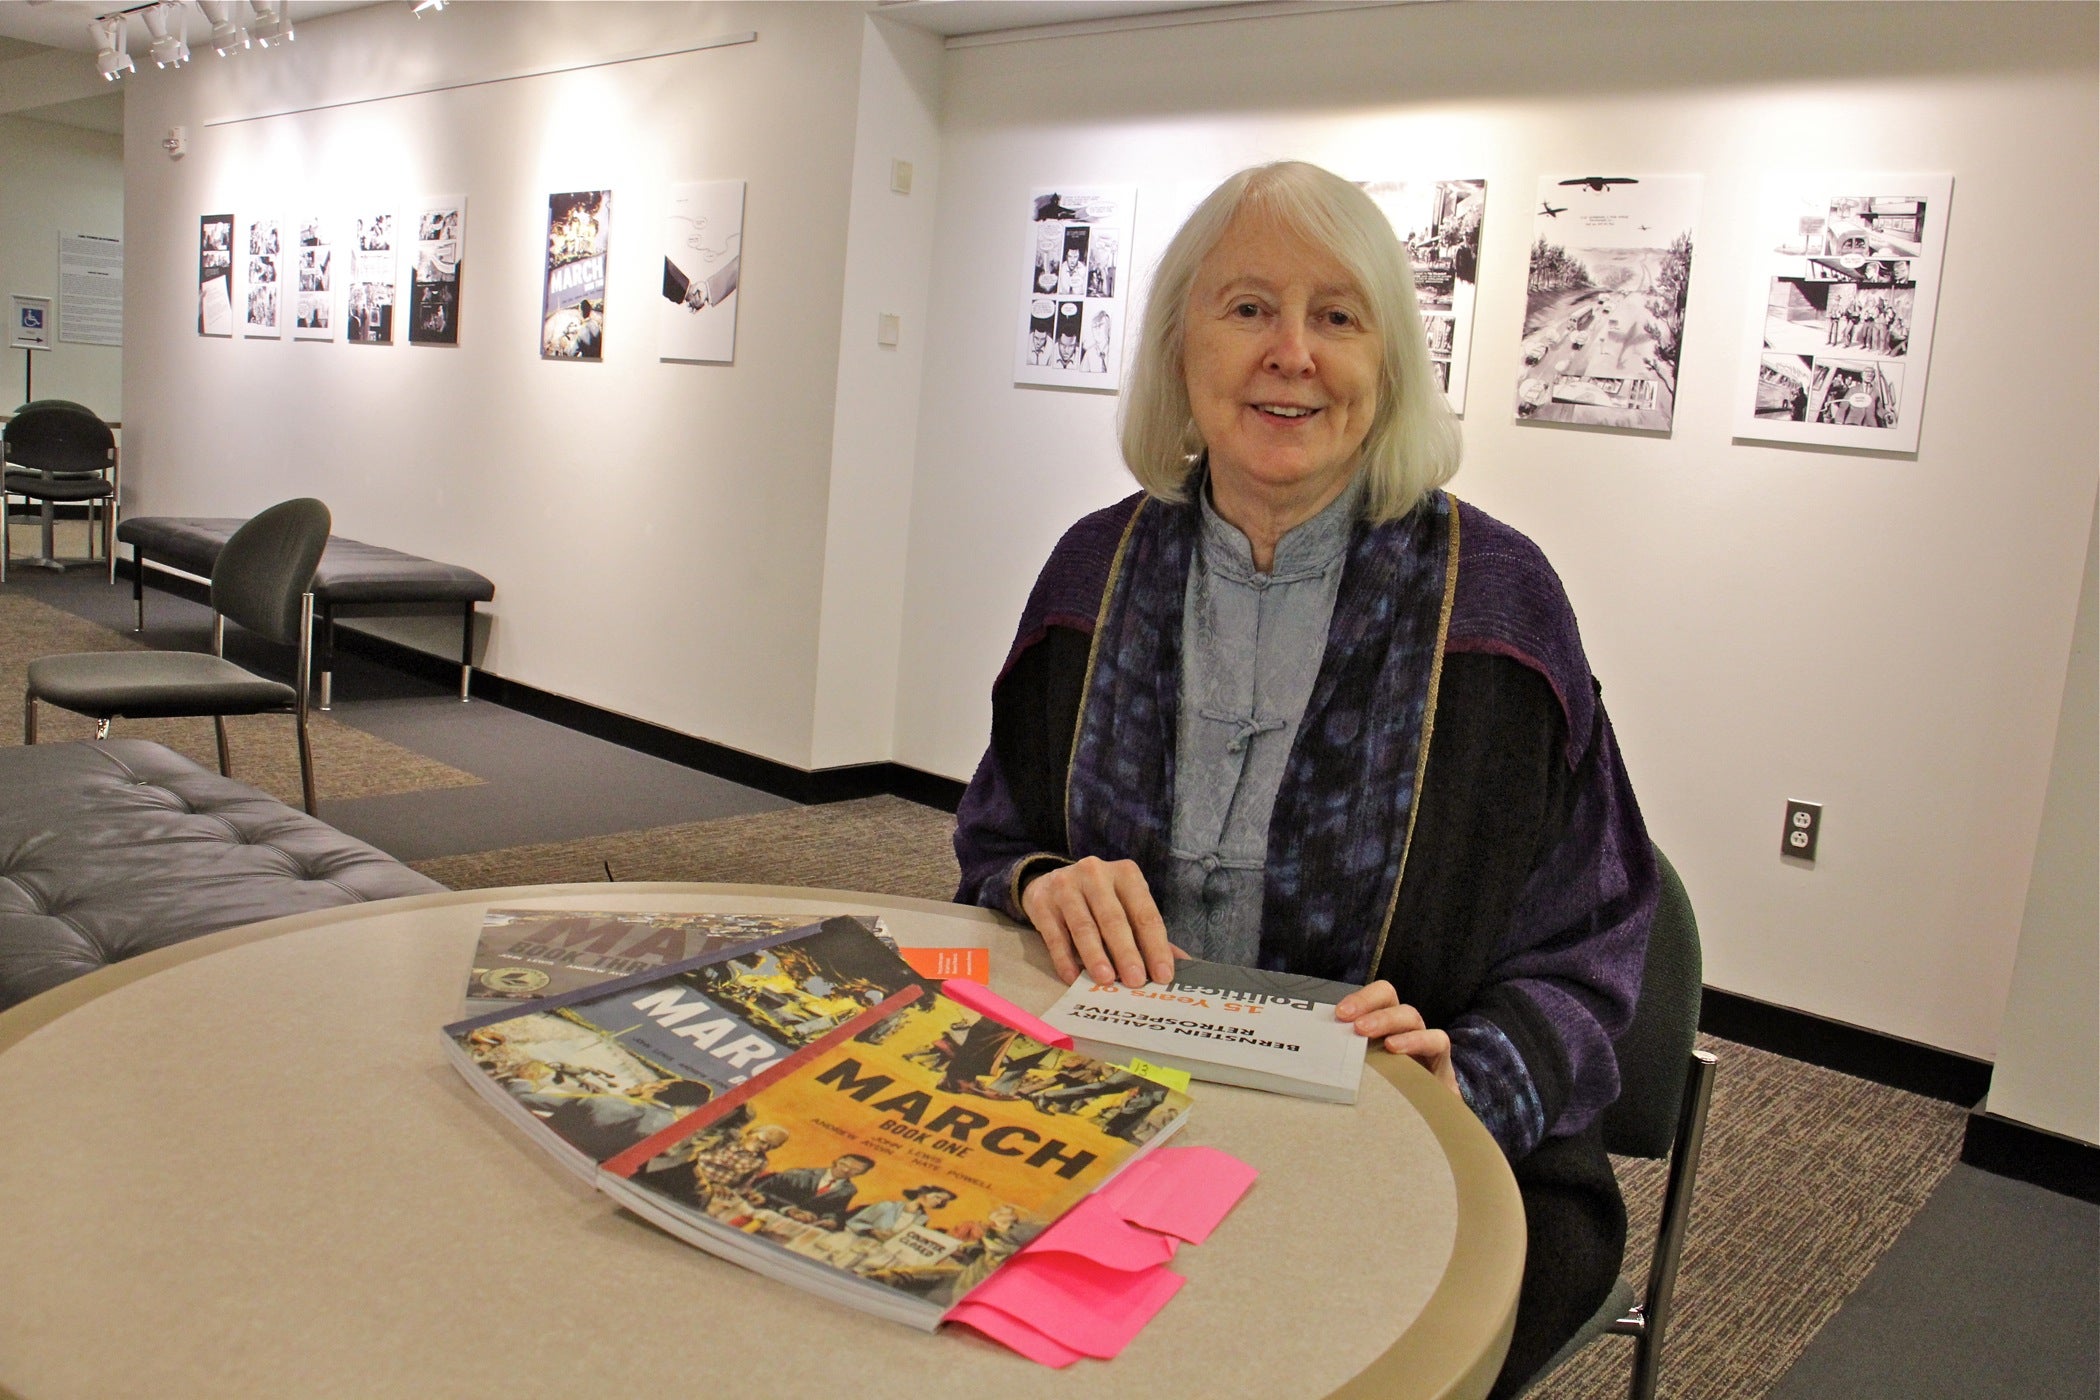 Mary Oestereicher Hamill, co-director of the Bernstein Gallery at Princeton University, lays out the graphic novels featured in the exhibit.